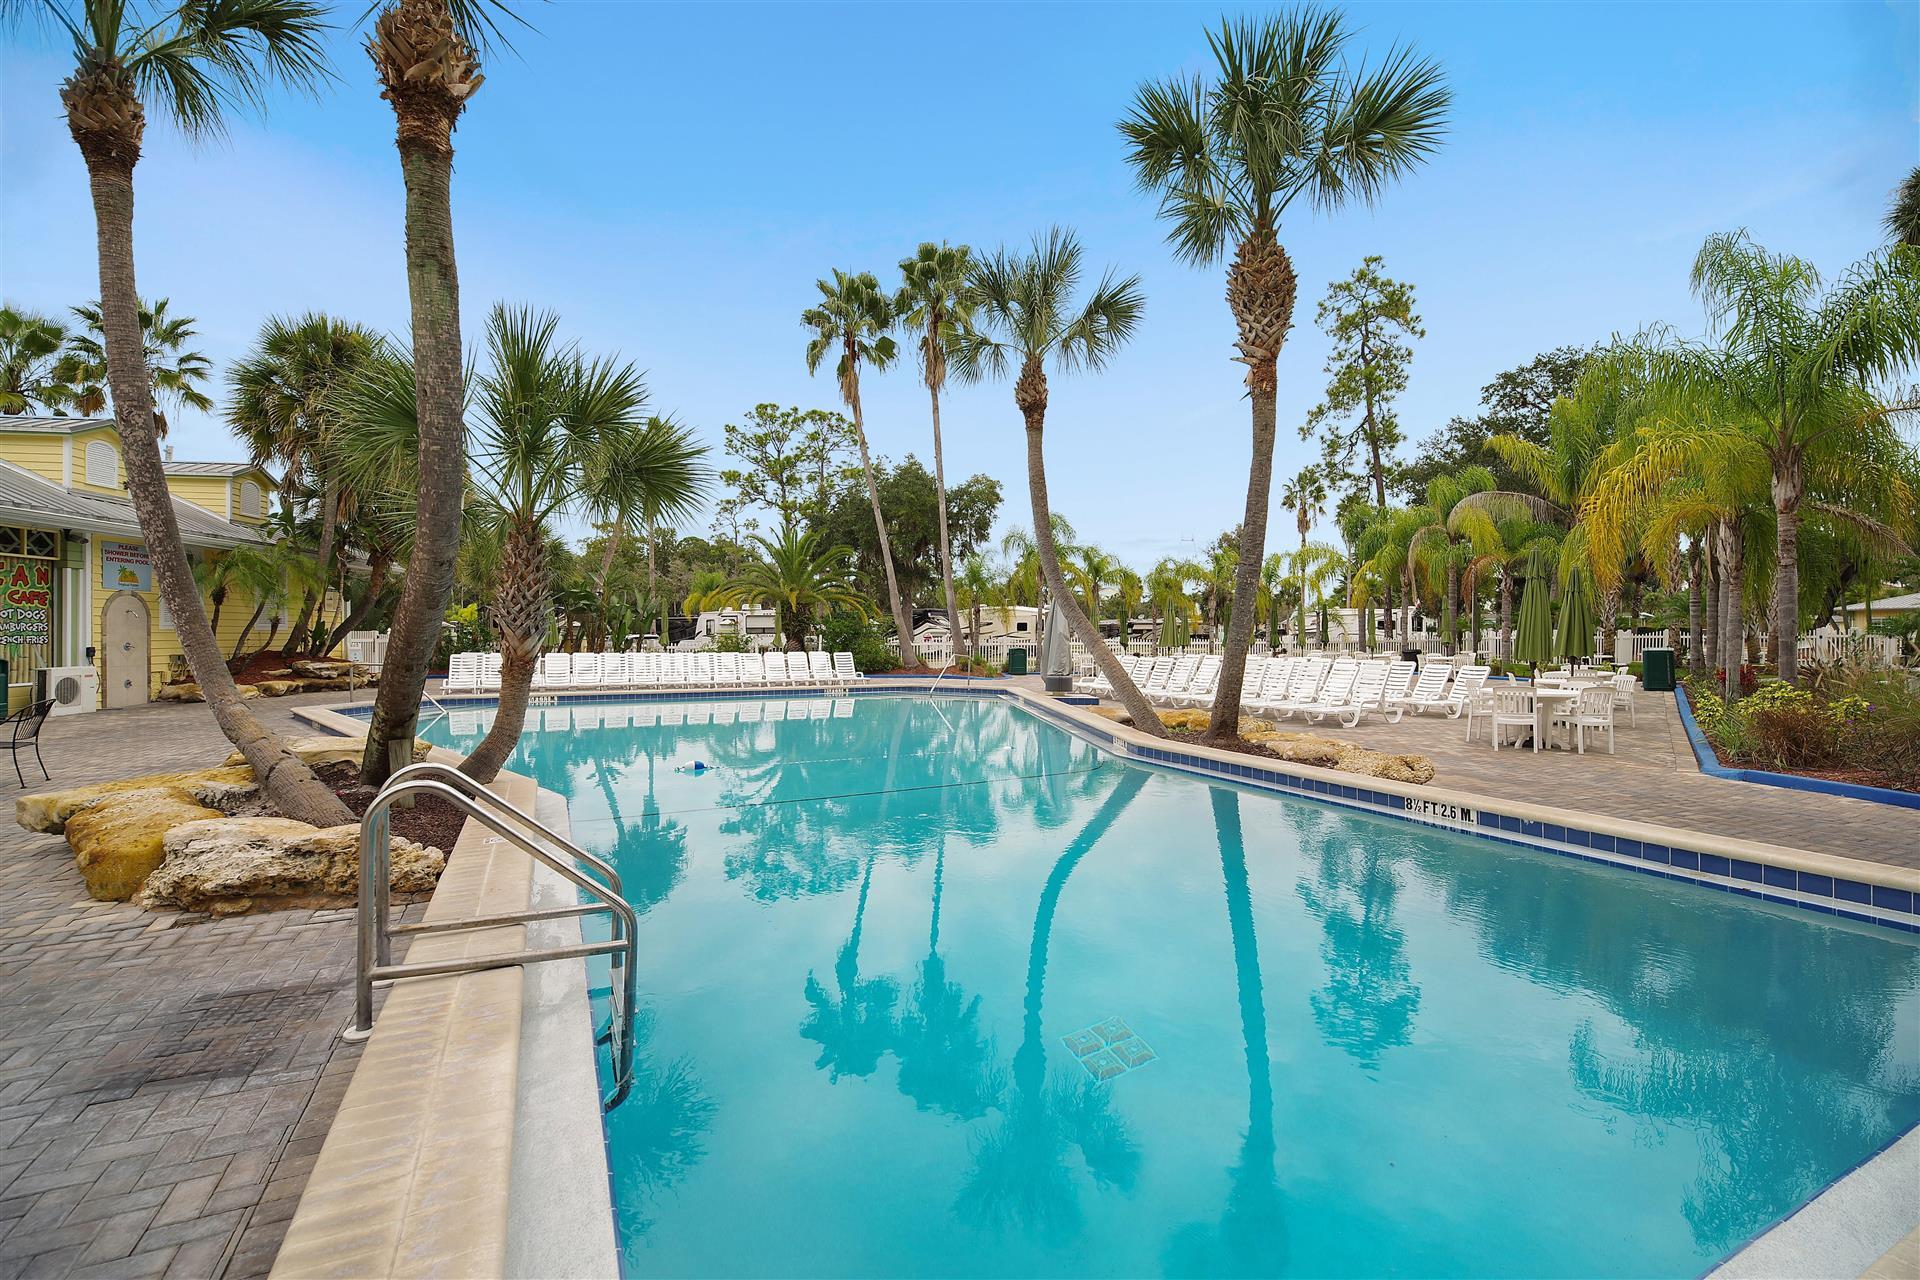 Tropical Palms Resort in Kissimmee, FL